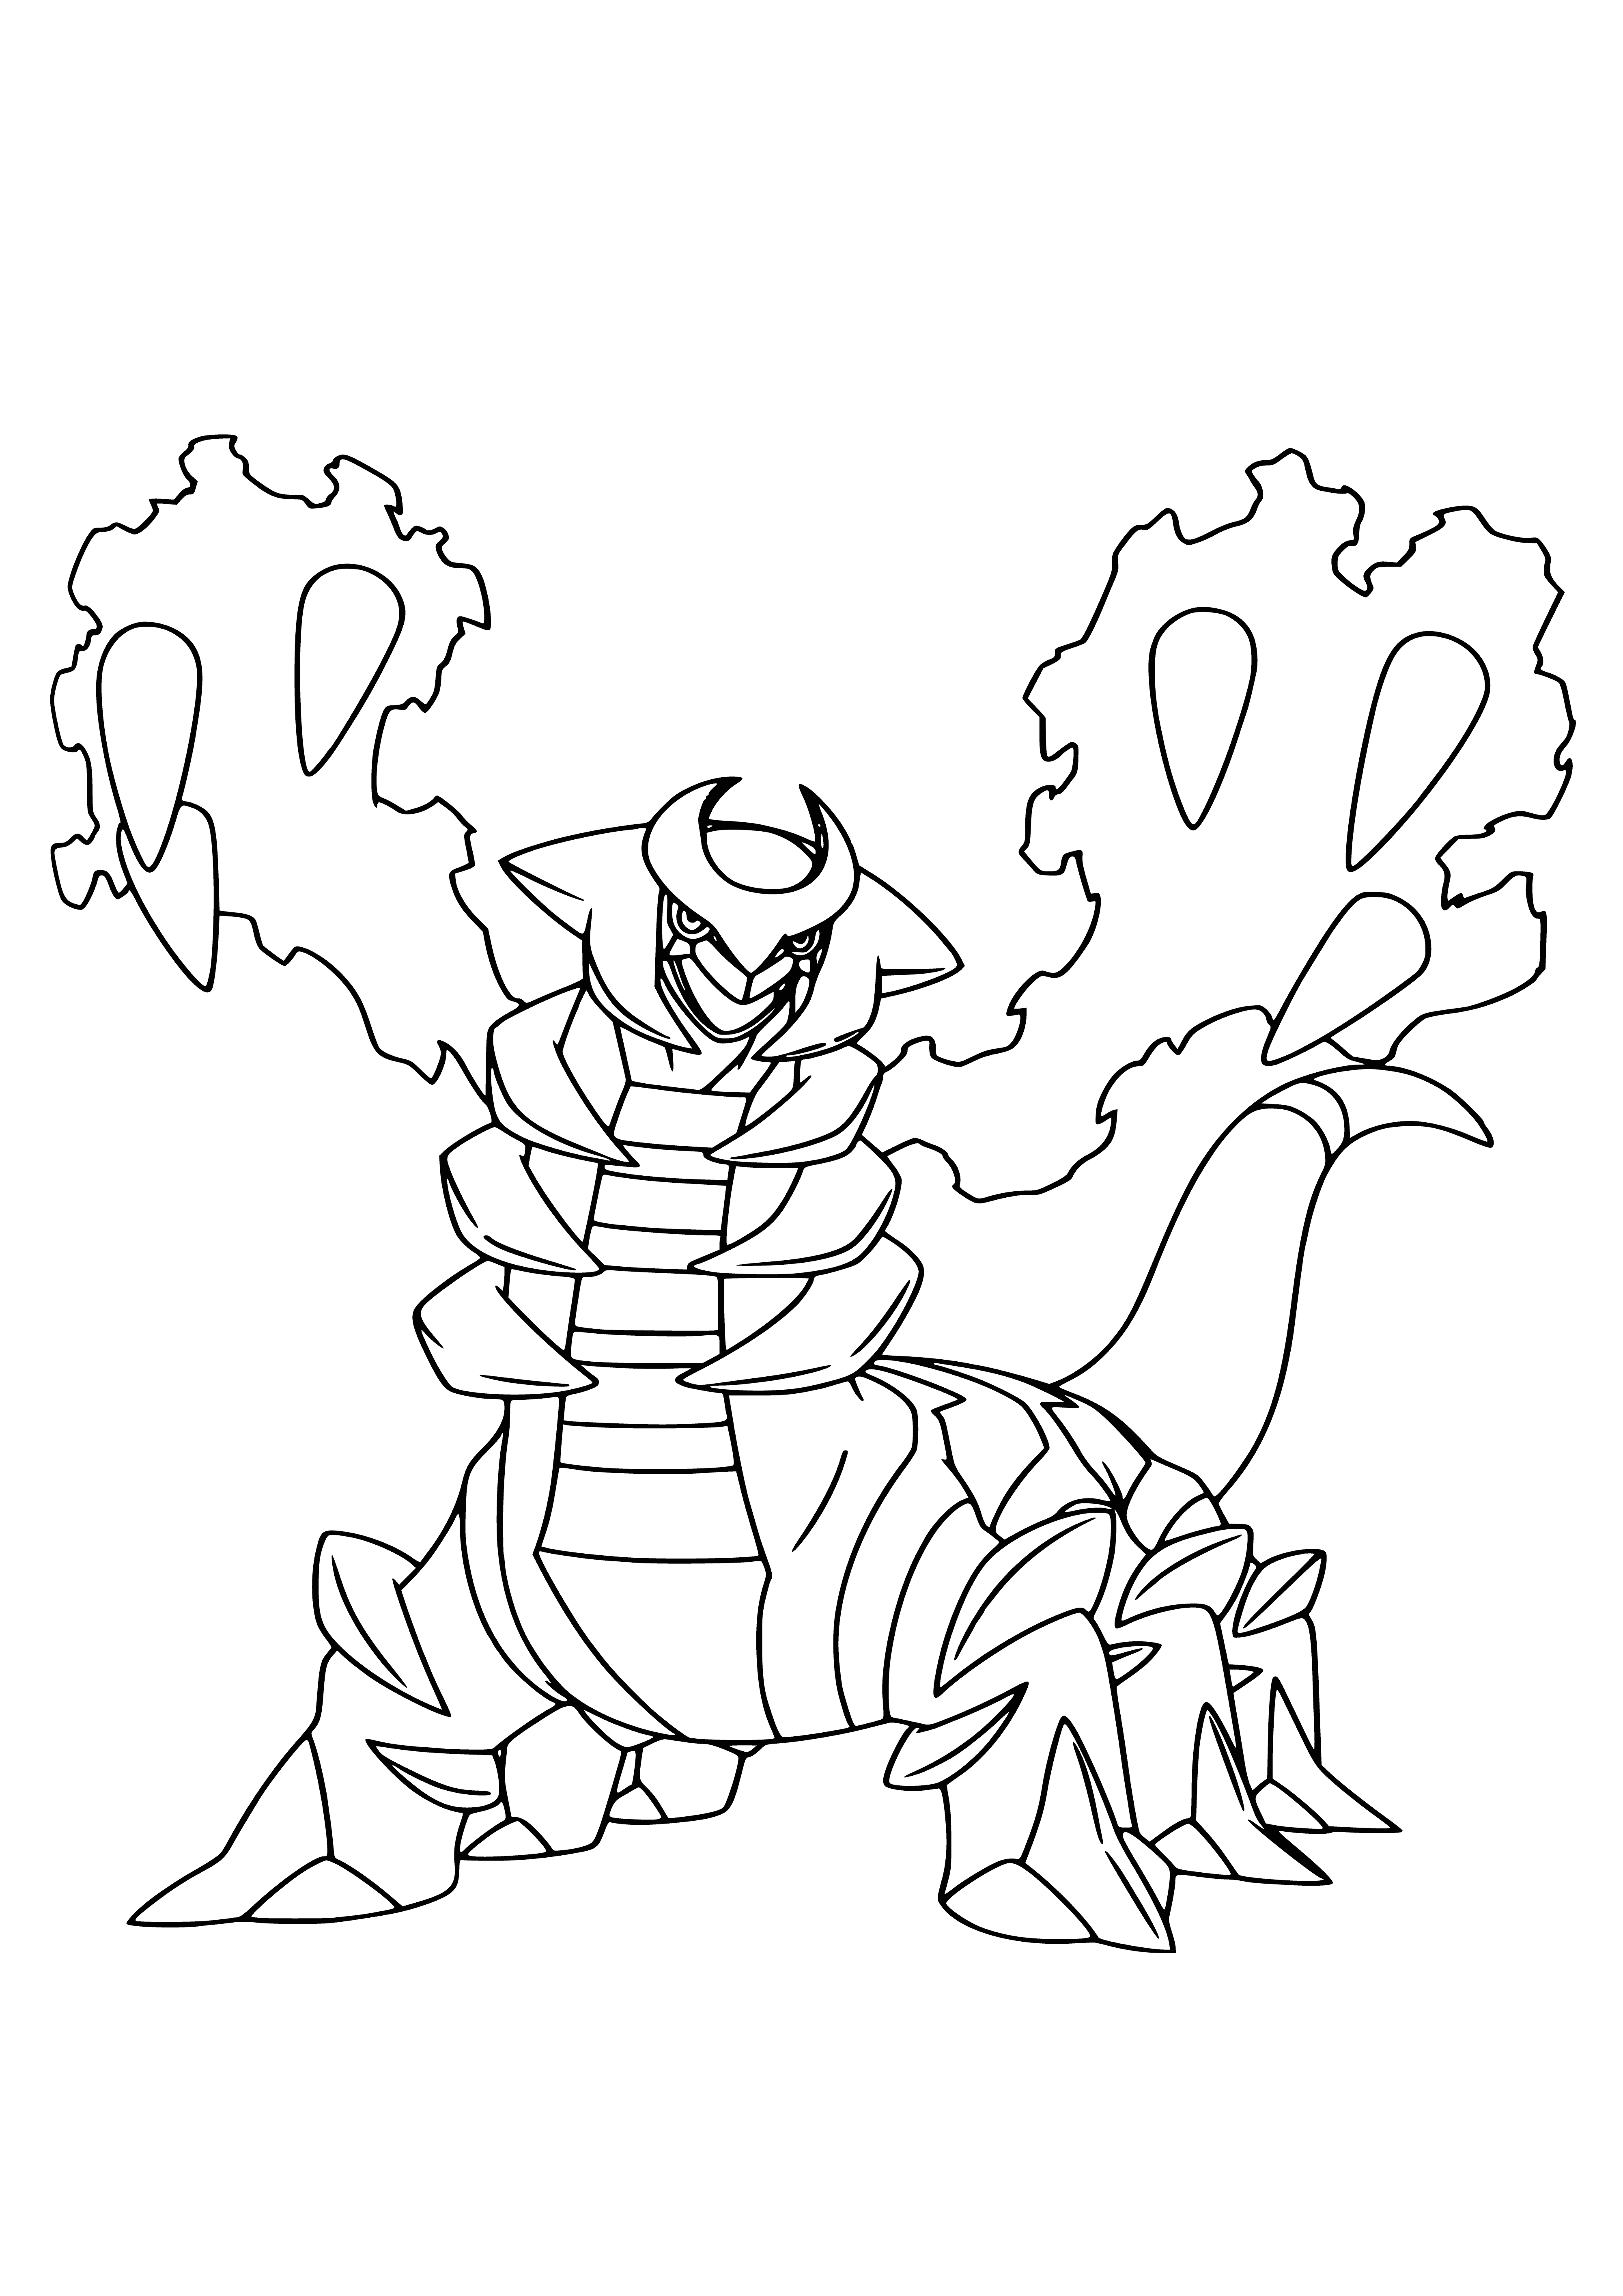 coloring page: Legendary Pokemon Giratina is a Ghost/Dragon type & version mascot for Pokemon Platinum. It's large, dark blue & snake-like w/ white wings, red eyes, & horn.